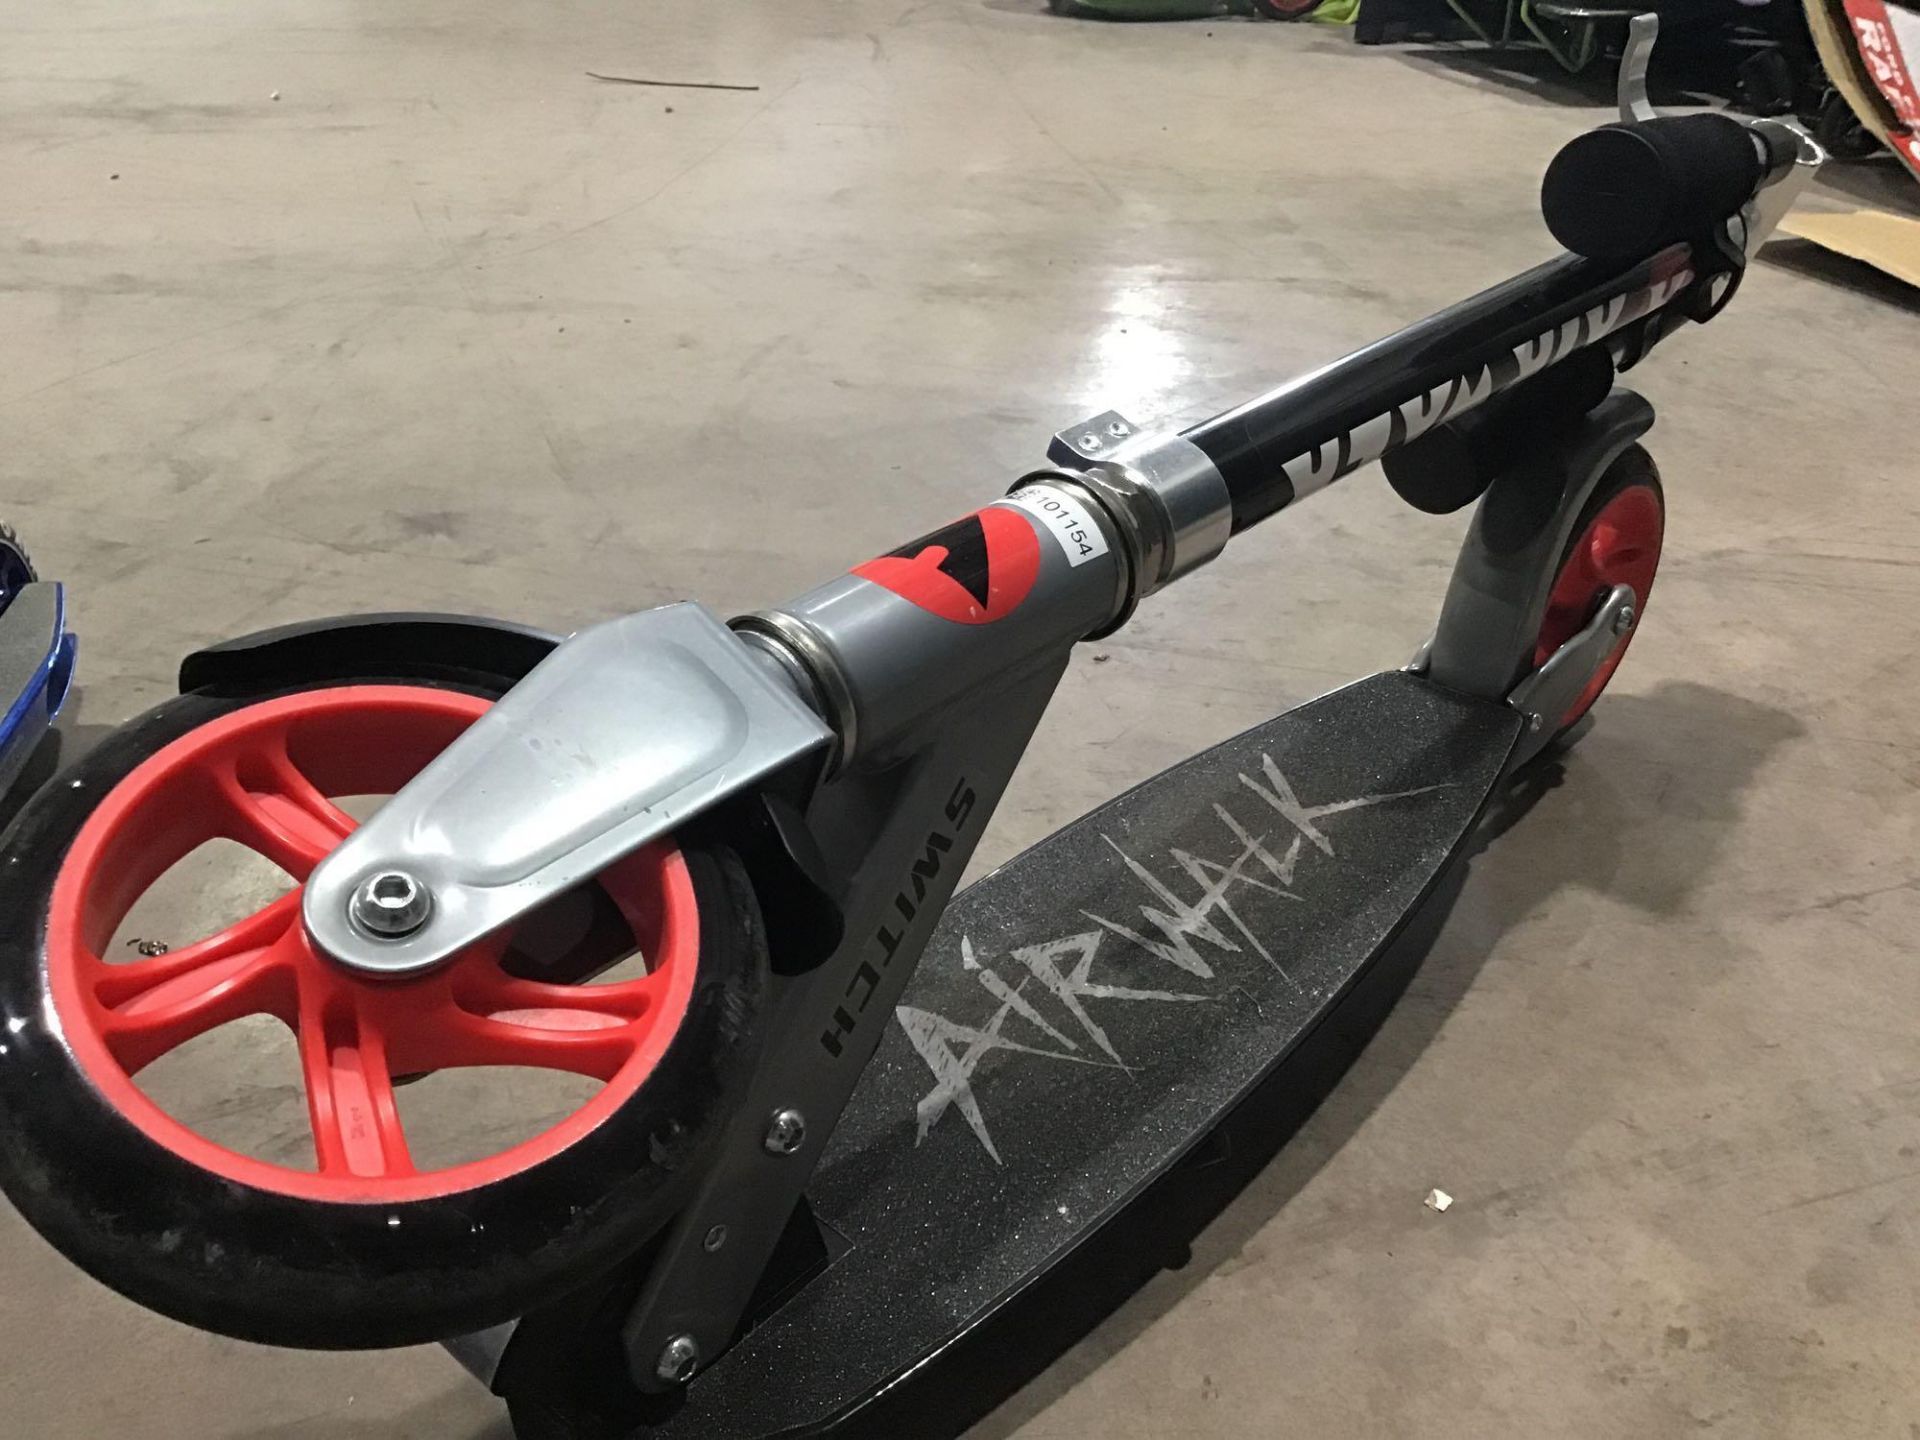 Airwalk Big Switch Folding Scooter 937/9251 £34.99 RRP - Image 2 of 4